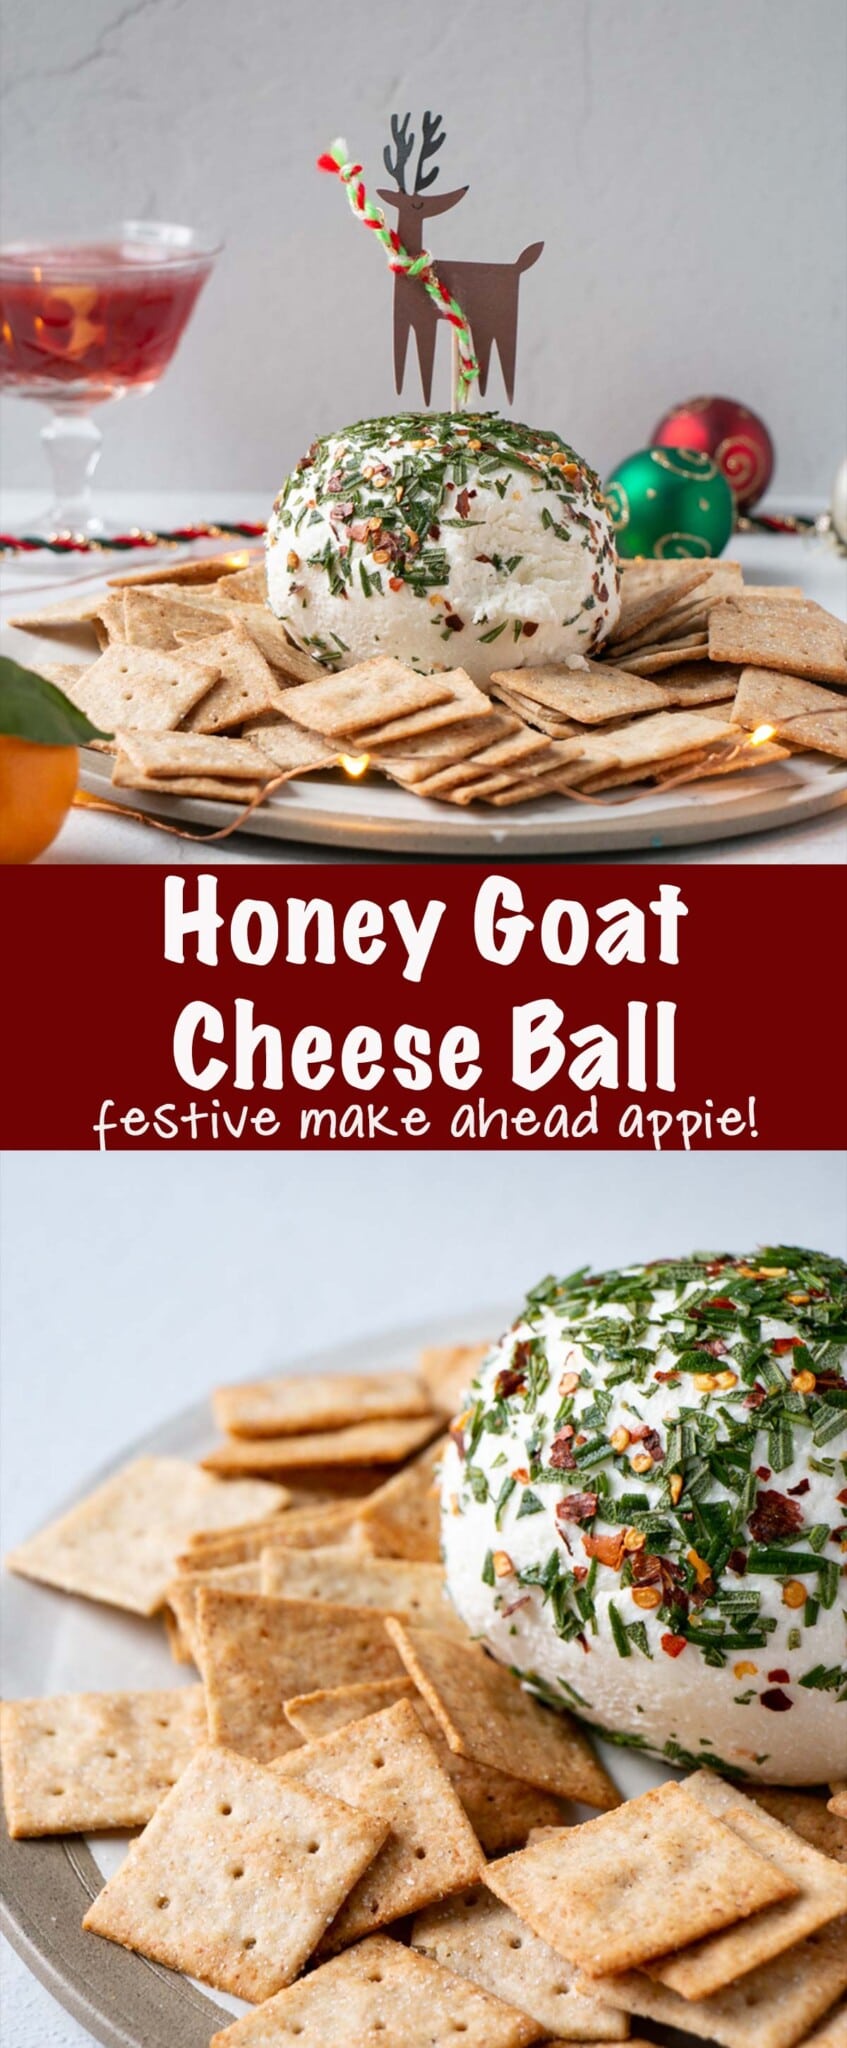 This savoury Honey Goat's Cheese Ball recipe is 4 ingredients that come together to make a festive appetizer. A perfect make ahead appie! via @mykitchenlove